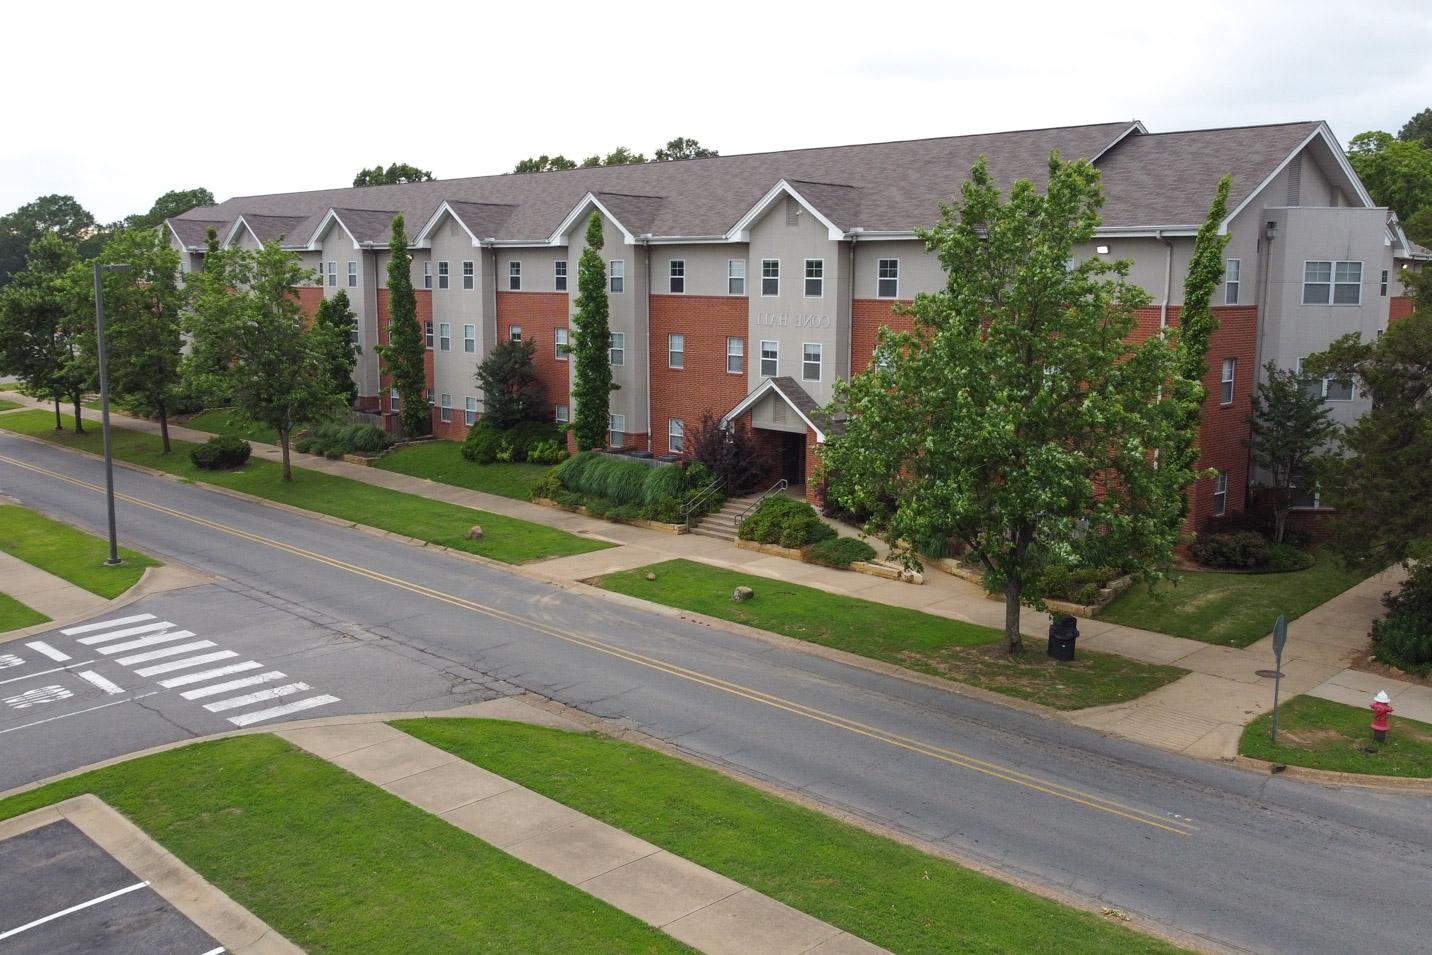 This is a photo of Cone Hall, a men's residence hall at Harding University.